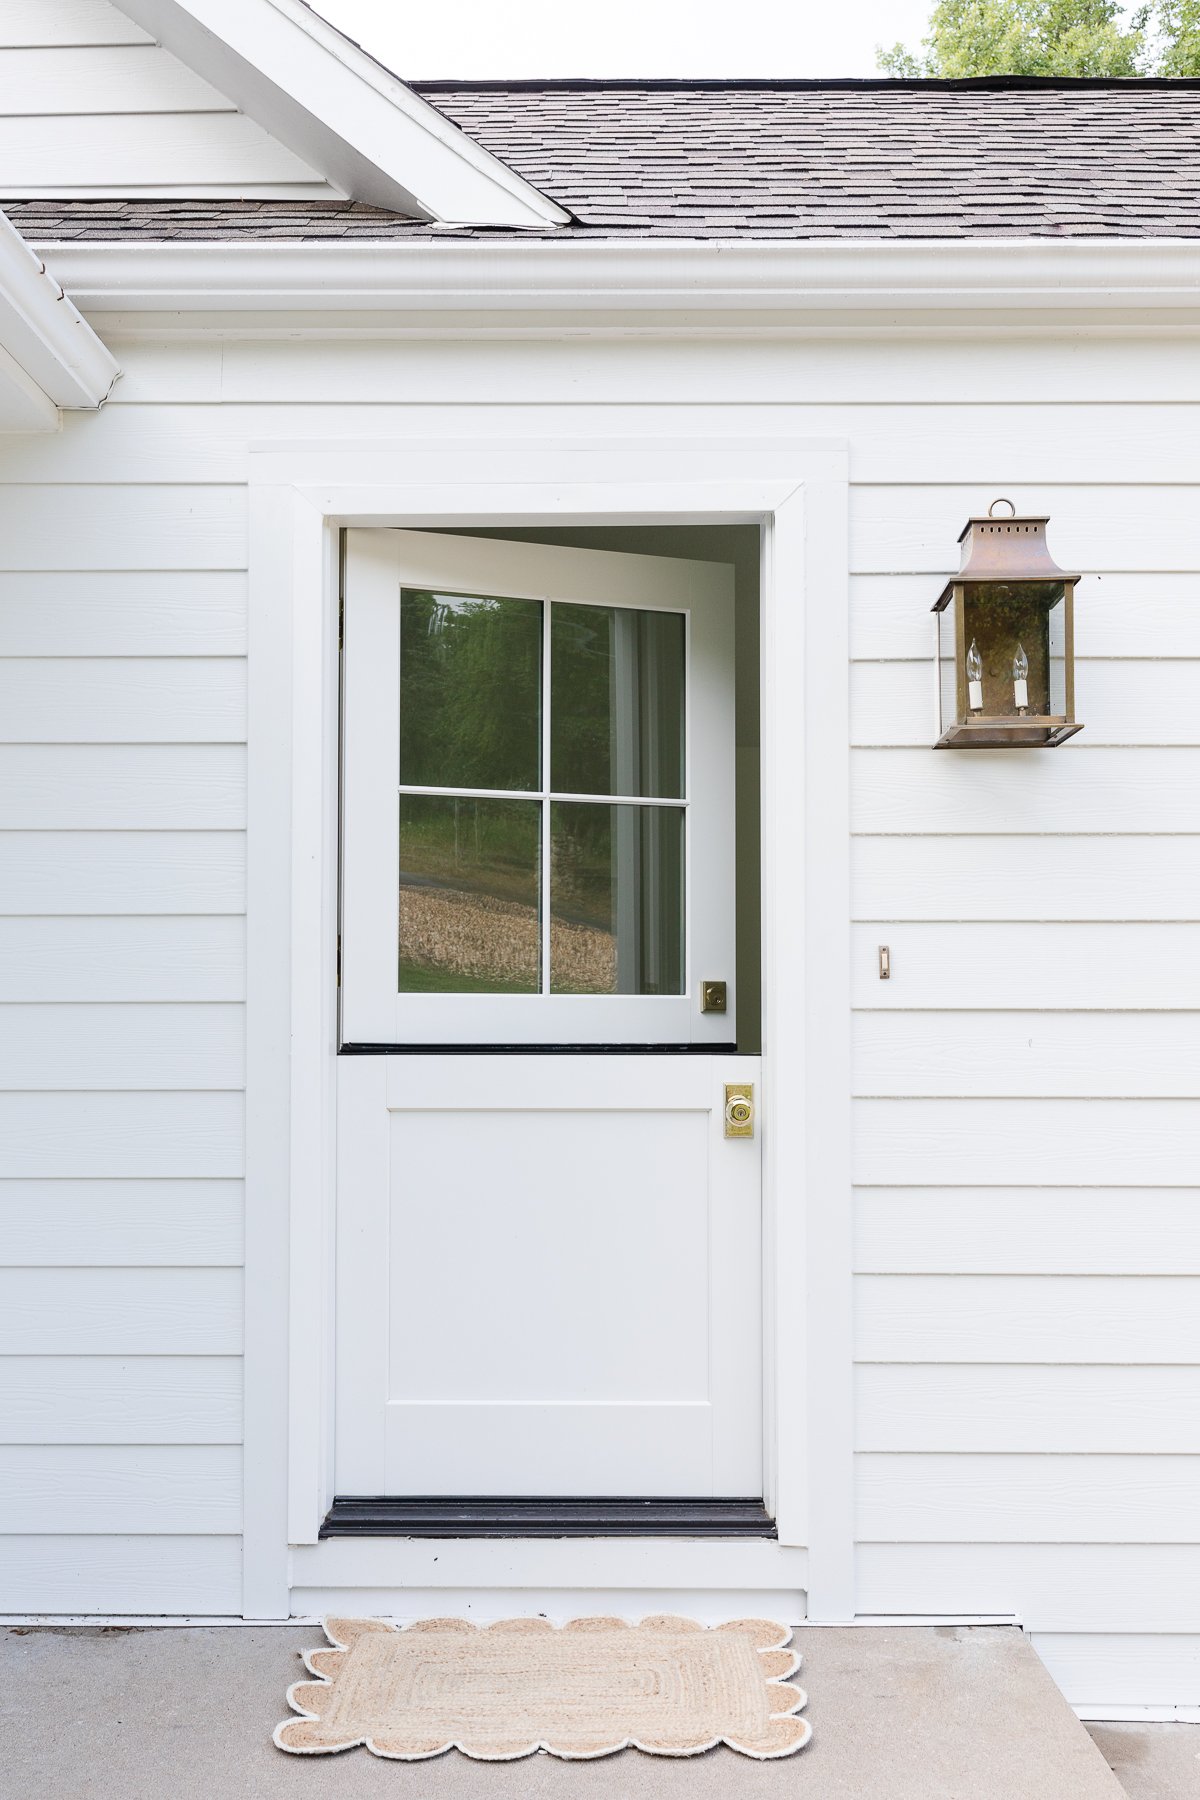 A white Dutch door on a white house in a guide to How to Sell a House Fast.